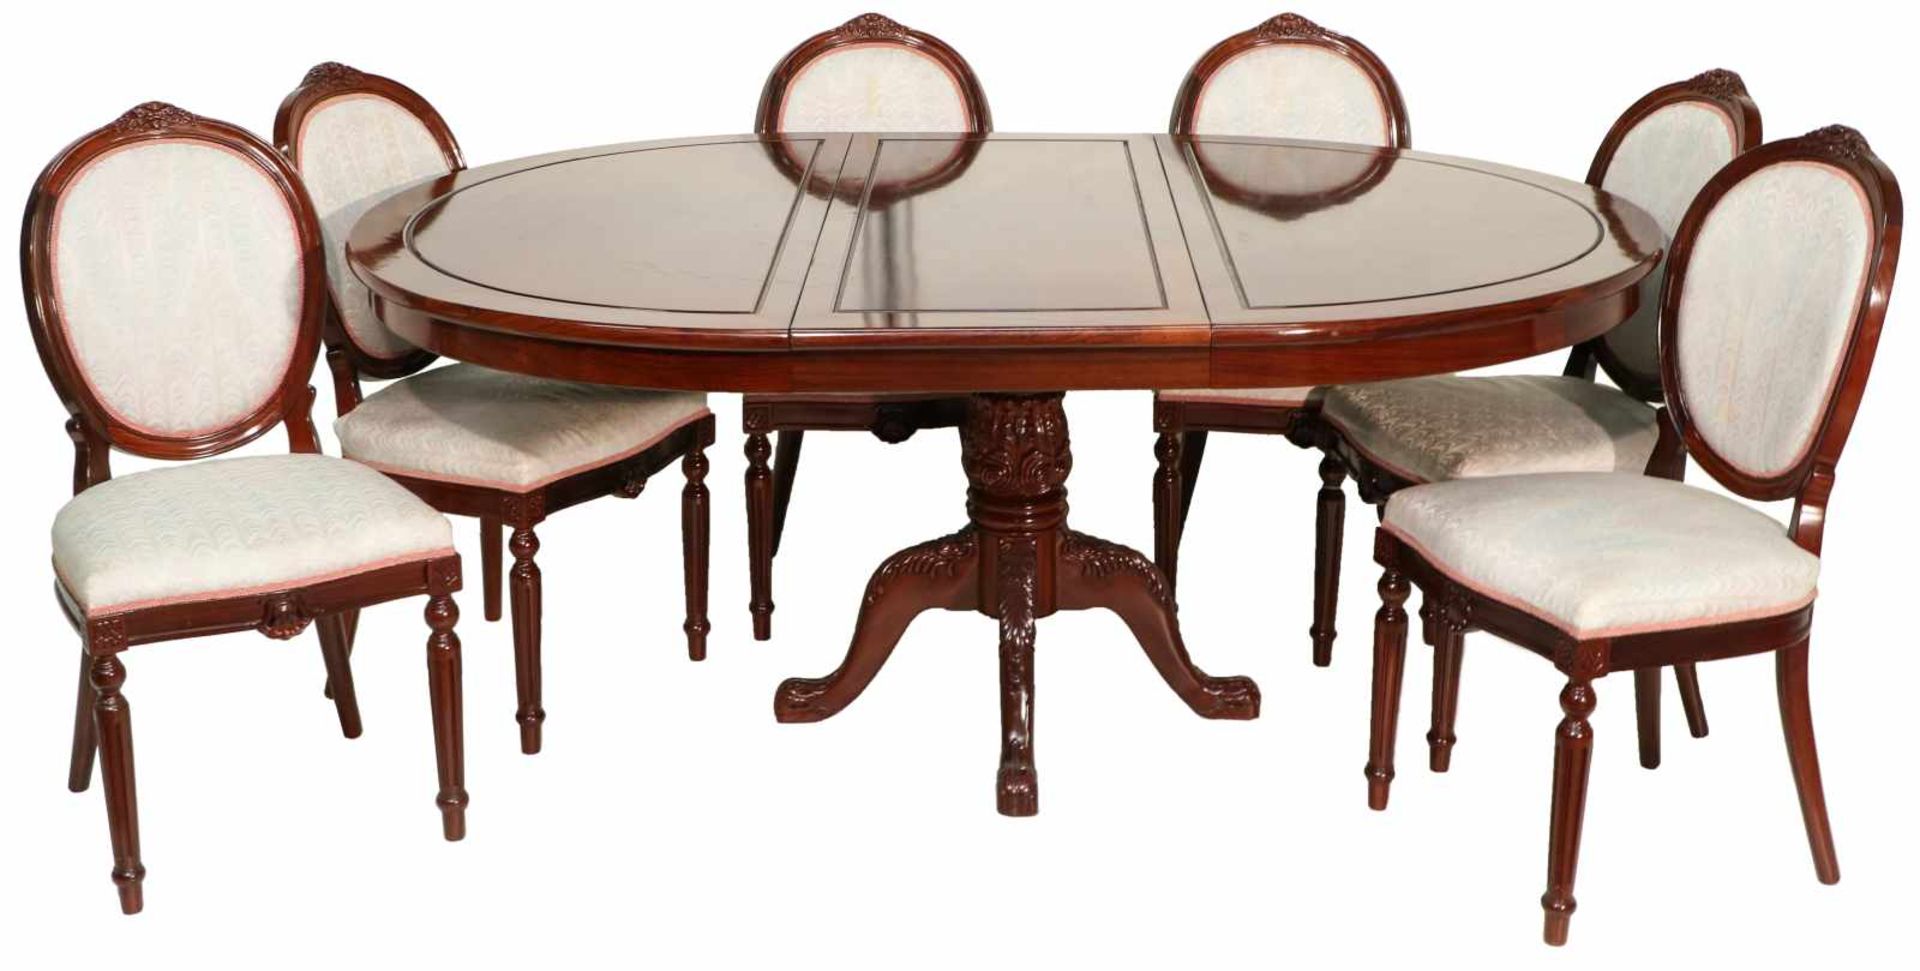 A mahogany extendable table with (6) matching chairs, after earlier example.